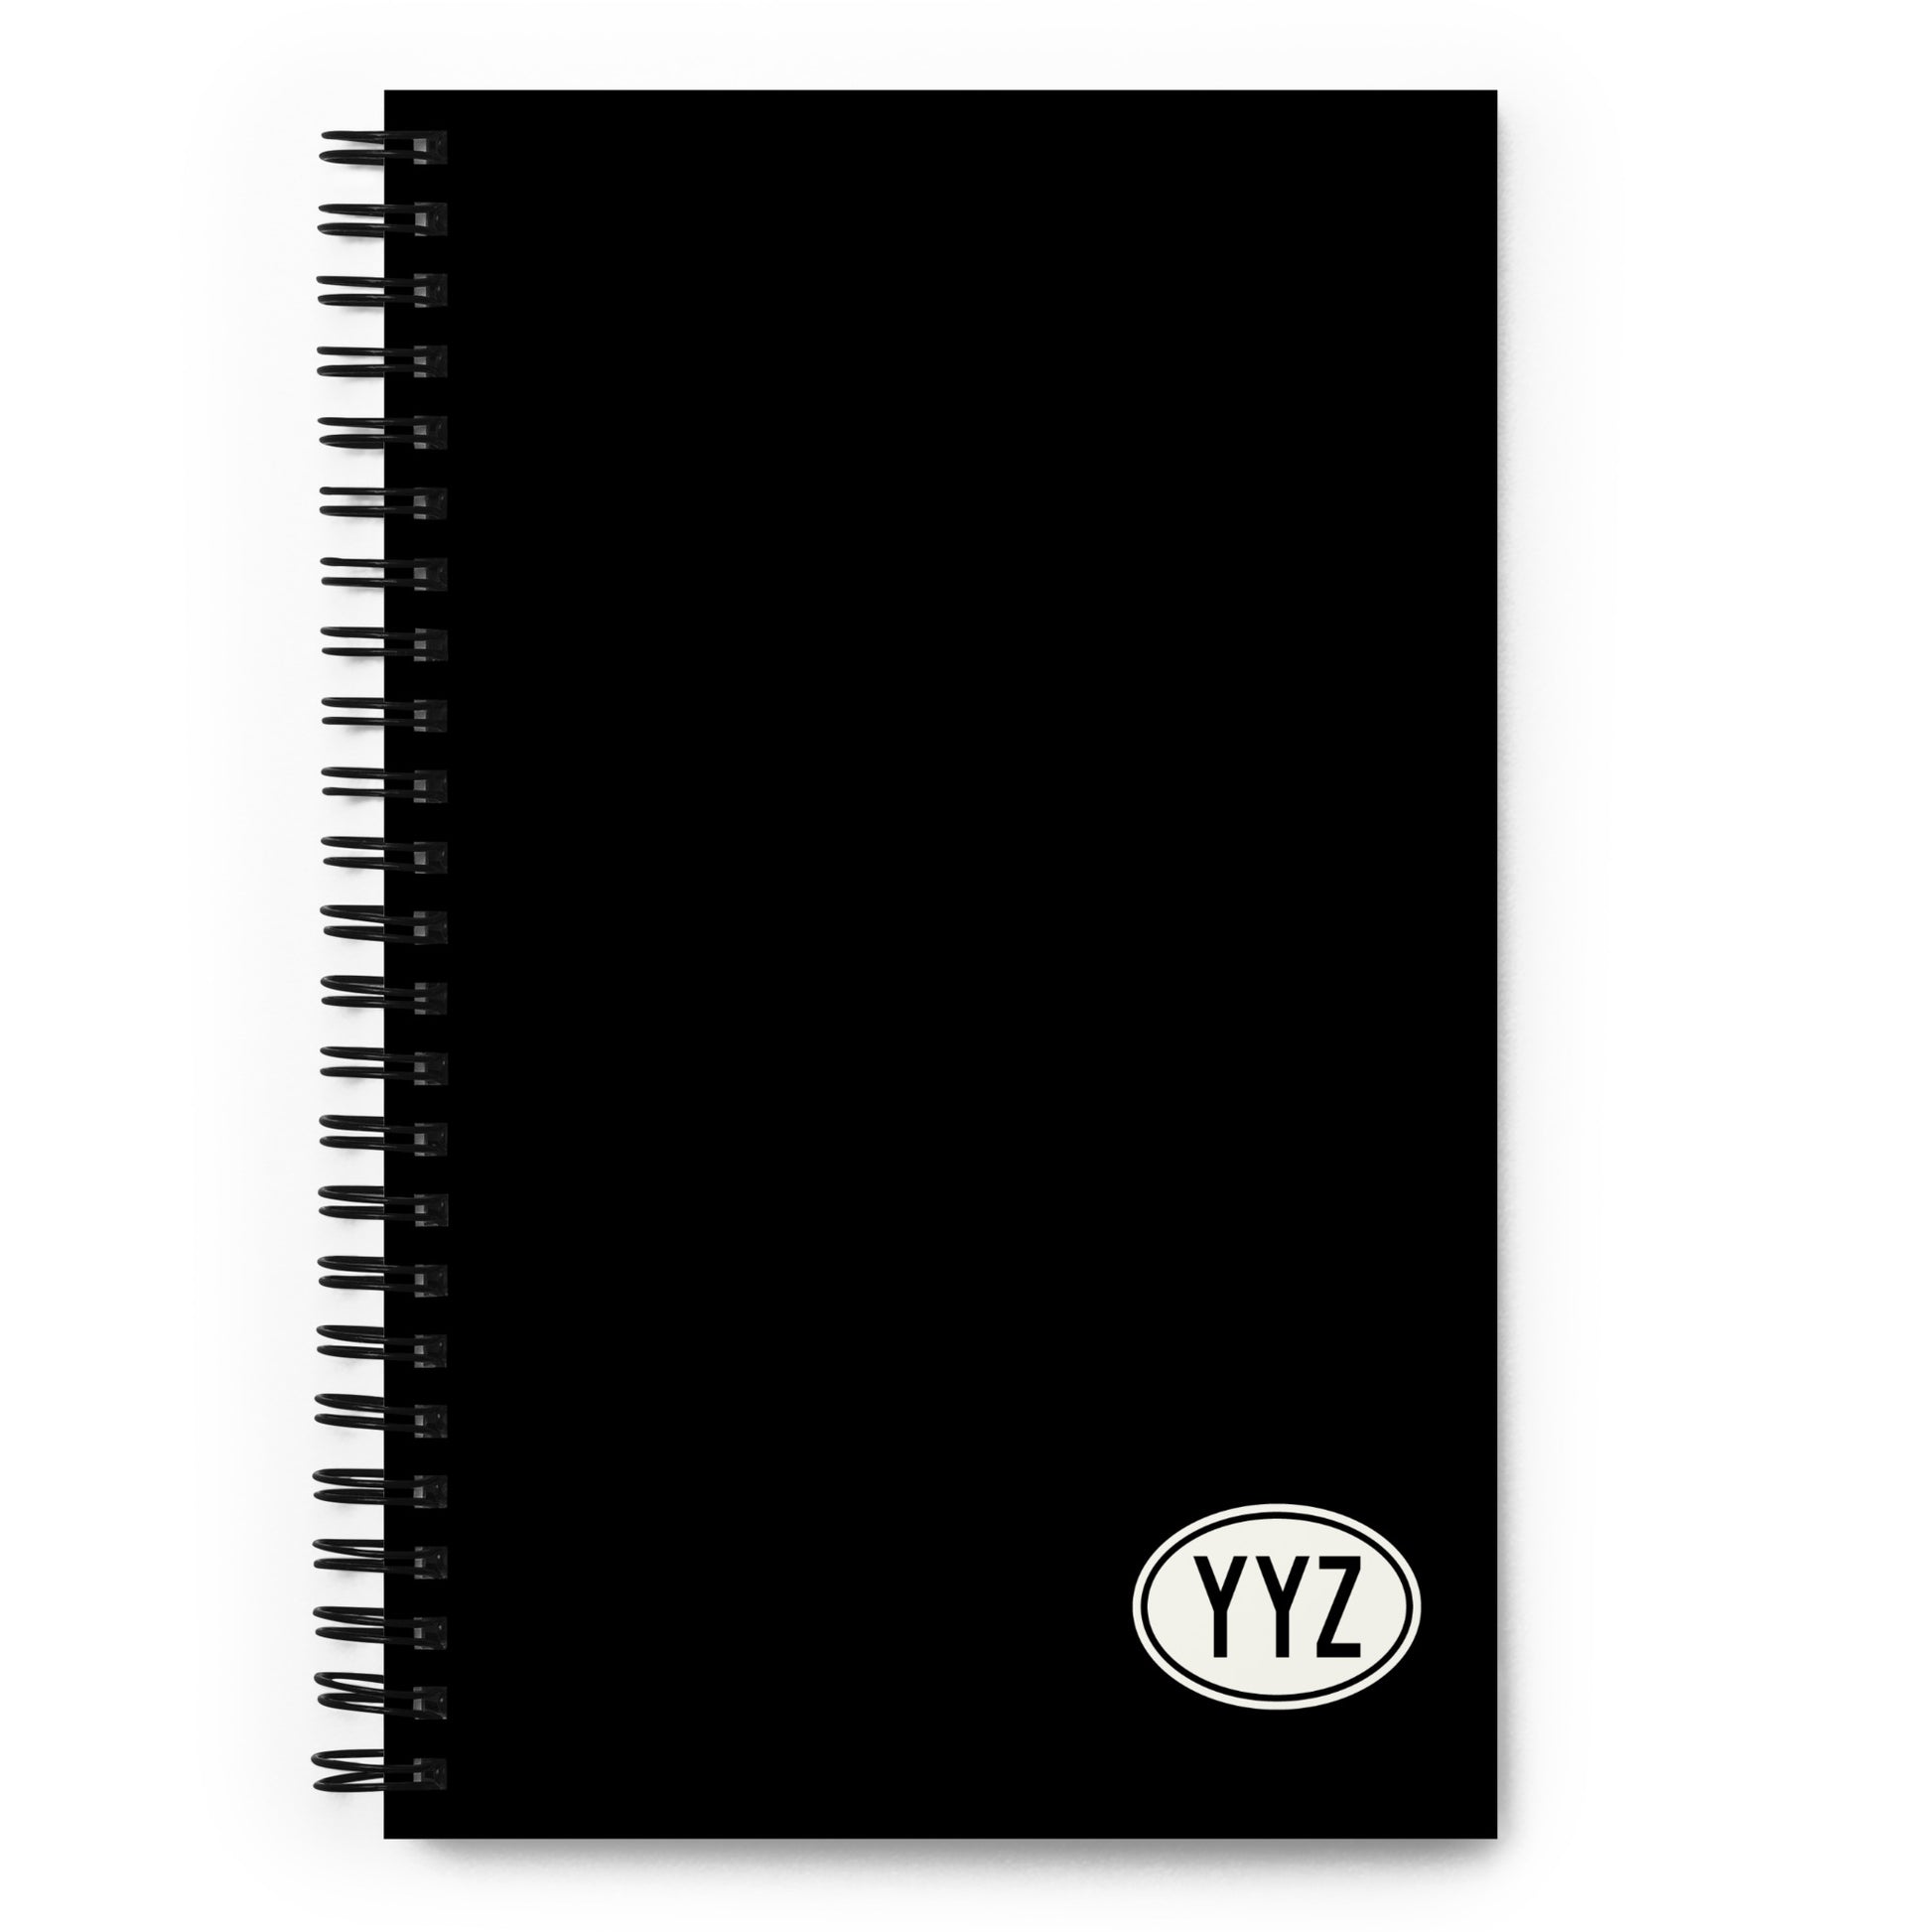 Unique Travel Gift Spiral Notebook - White Oval • YYZ Toronto • YHM Designs - Image 01